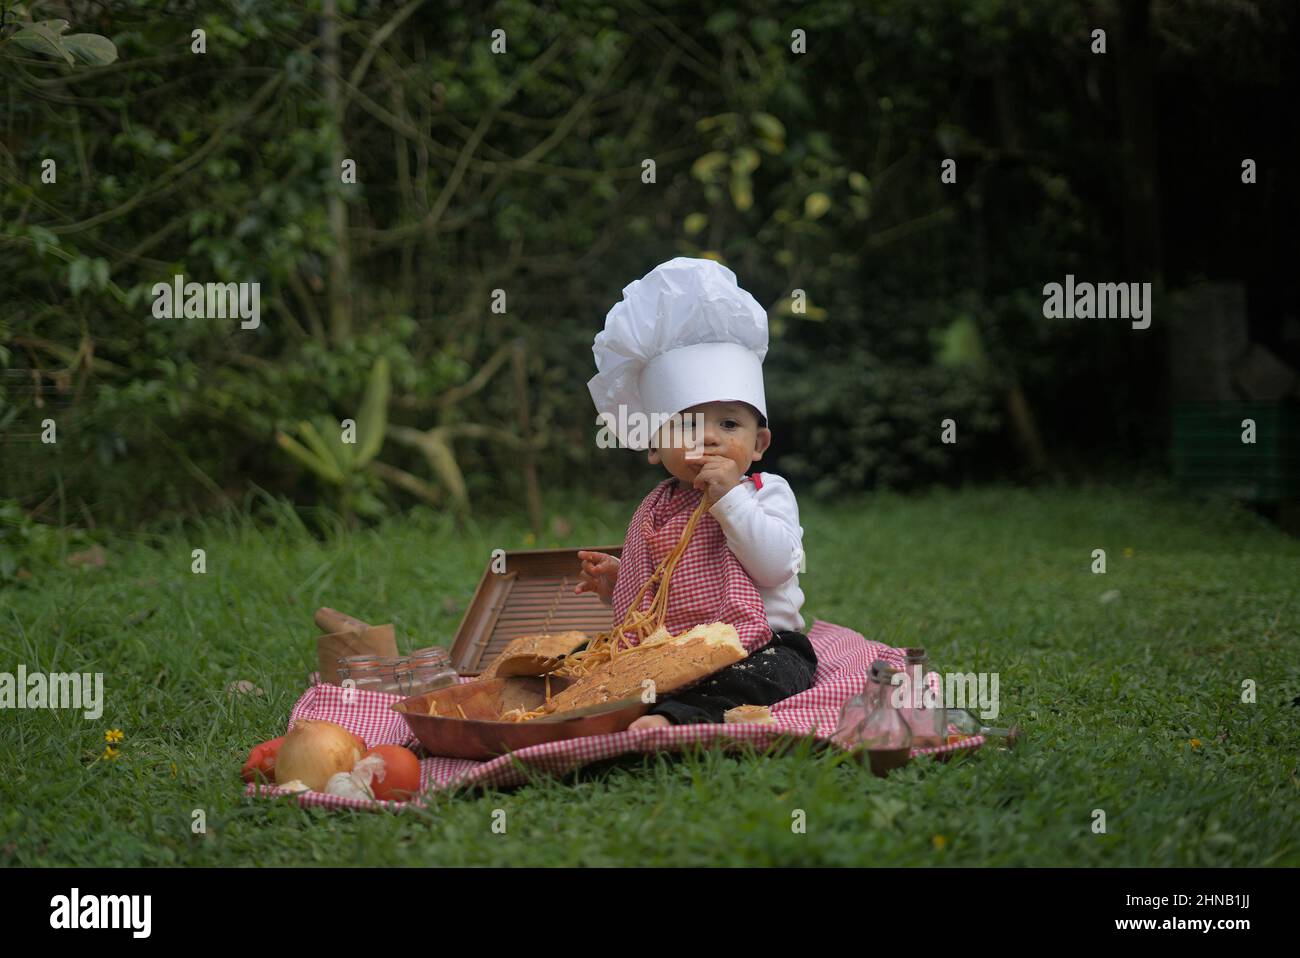 Adorable Caucasian child doing a picnic on the grass in a chef uniform Stock Photo